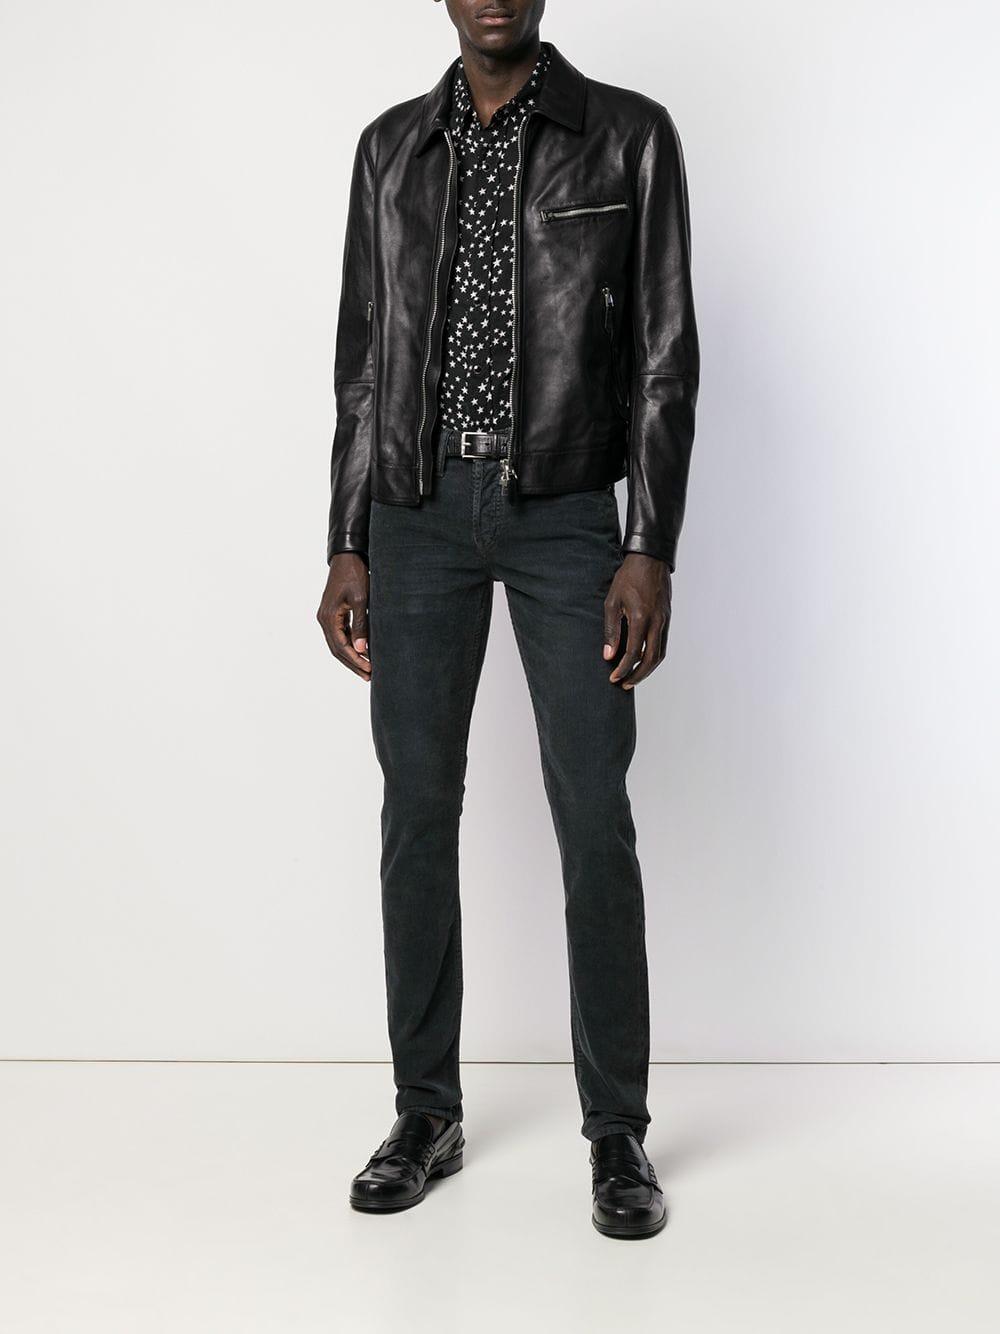 Tom Ford Classic Leather Jacket in Black for Men - Lyst